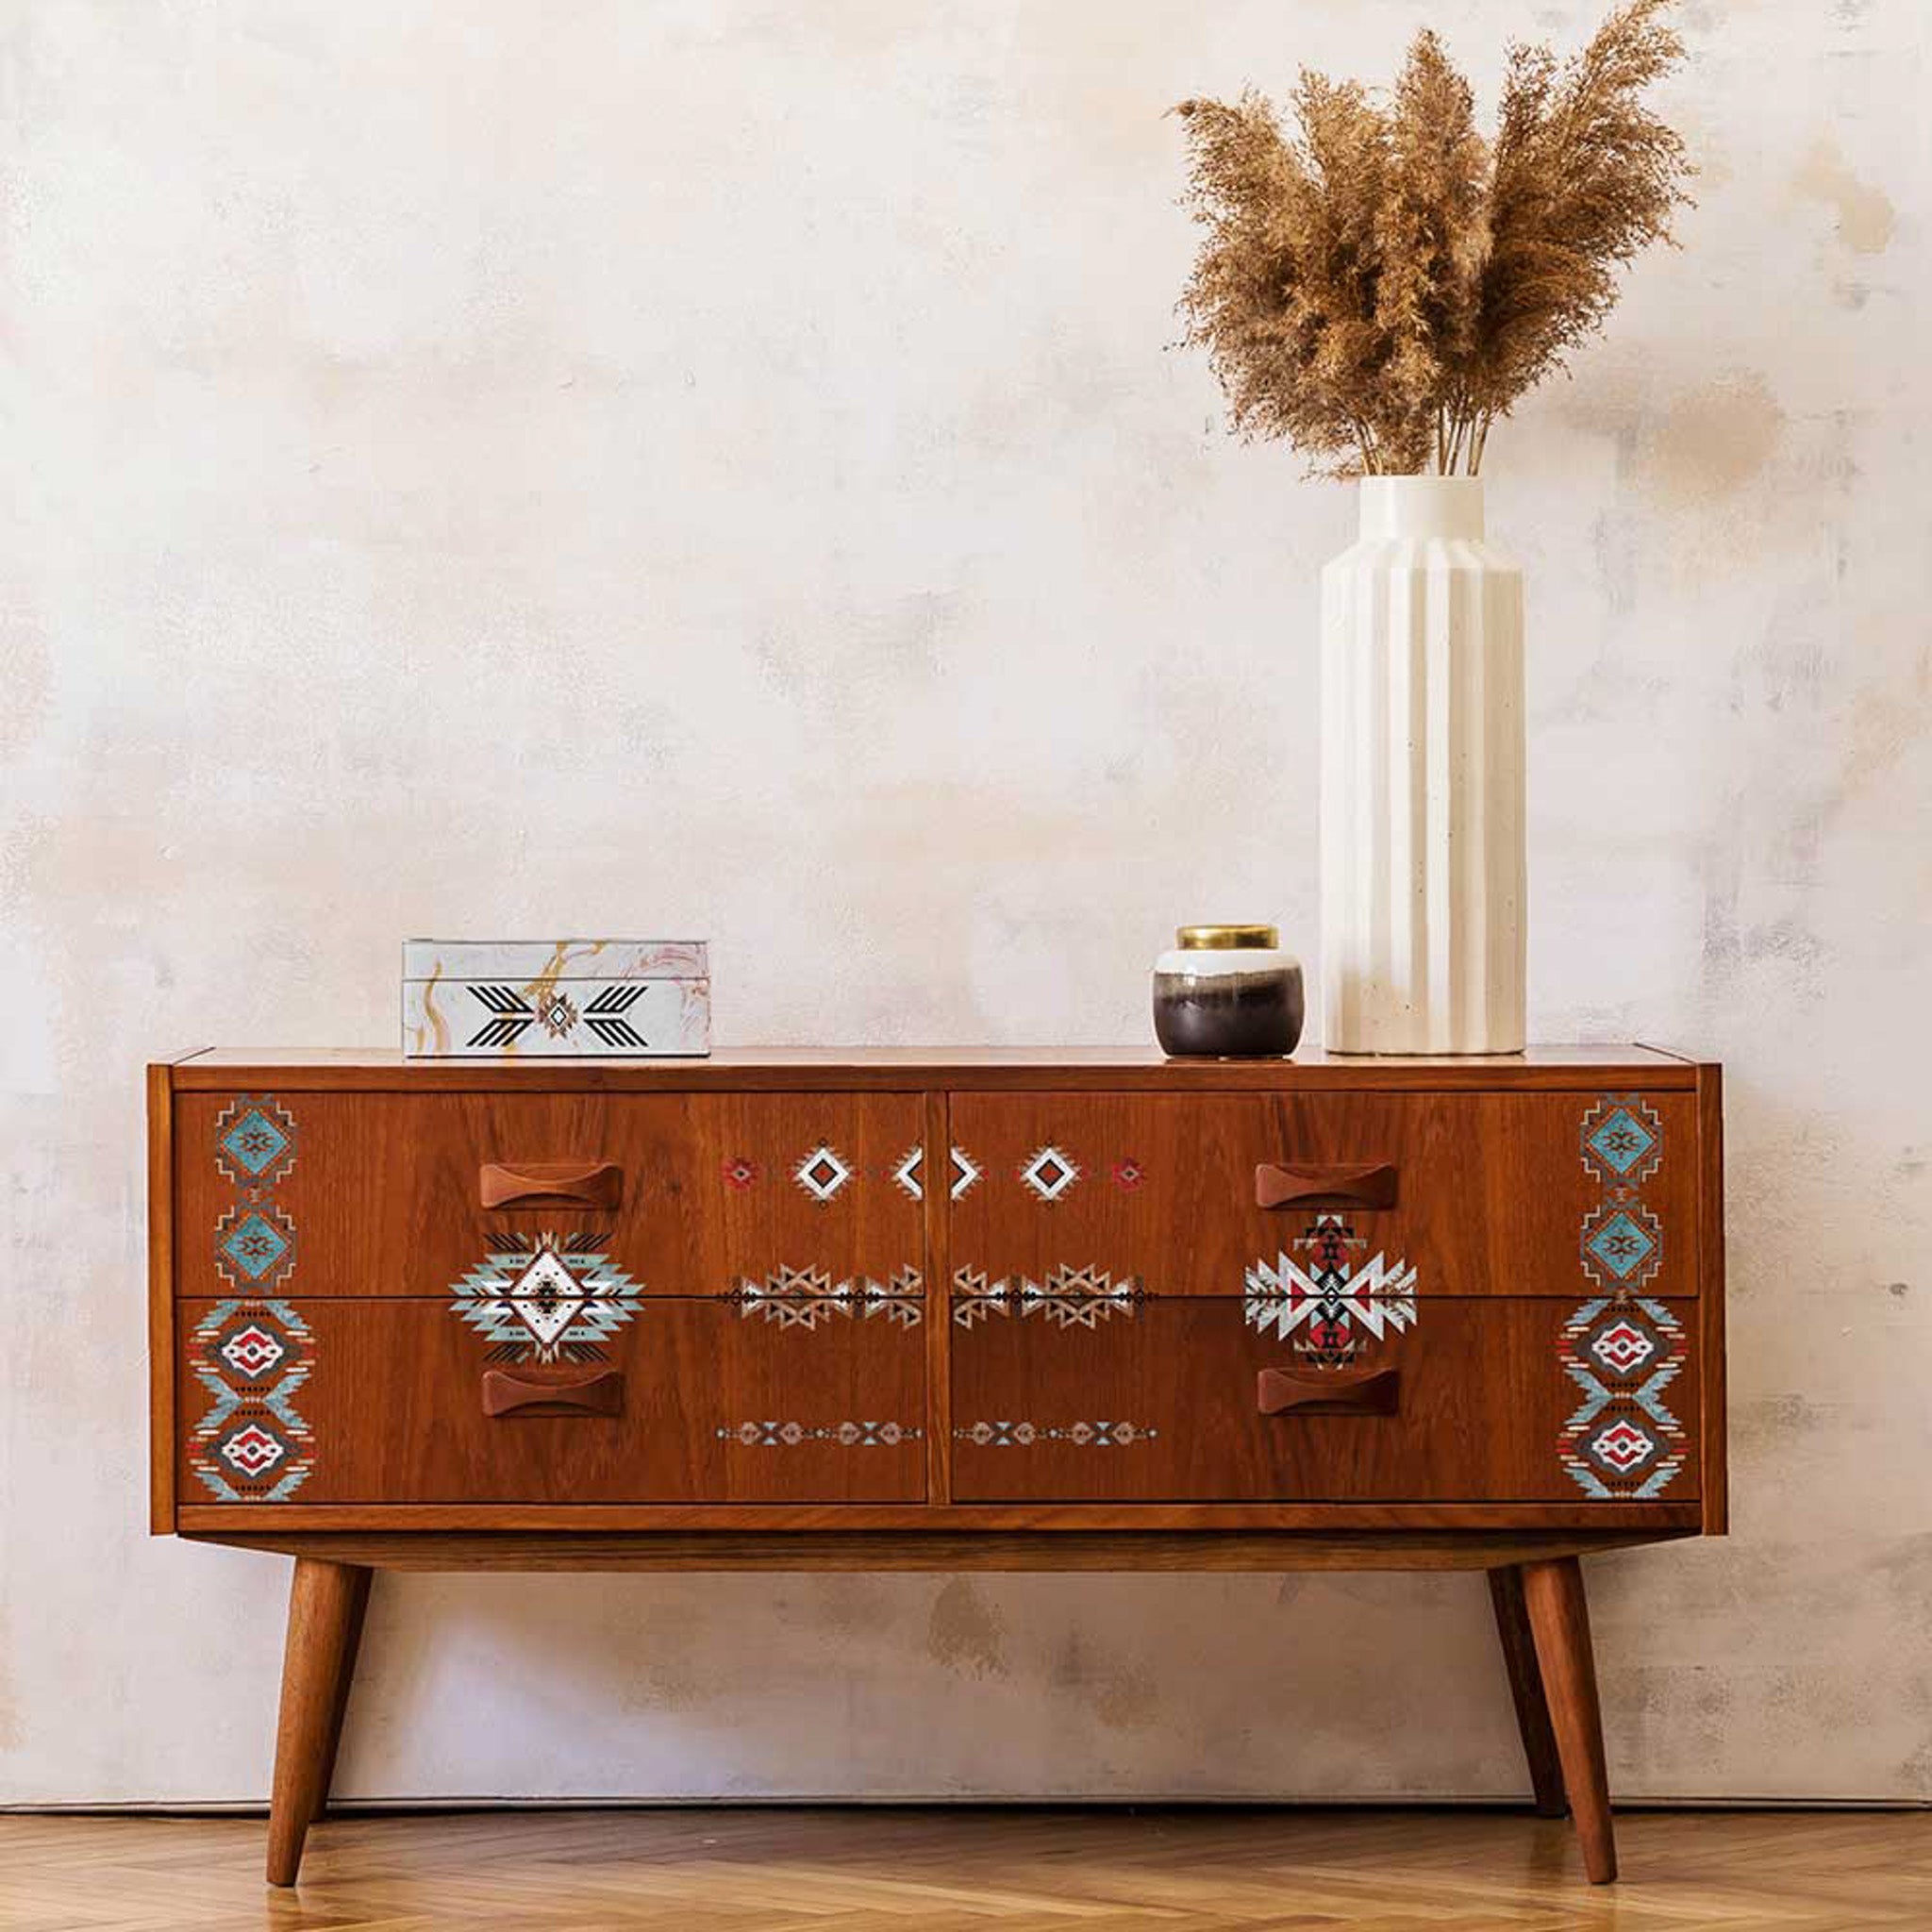 A 70's inspired console table is stained a dark natural wood and features ReDesign with Prima's Something Tribal transfer on it.